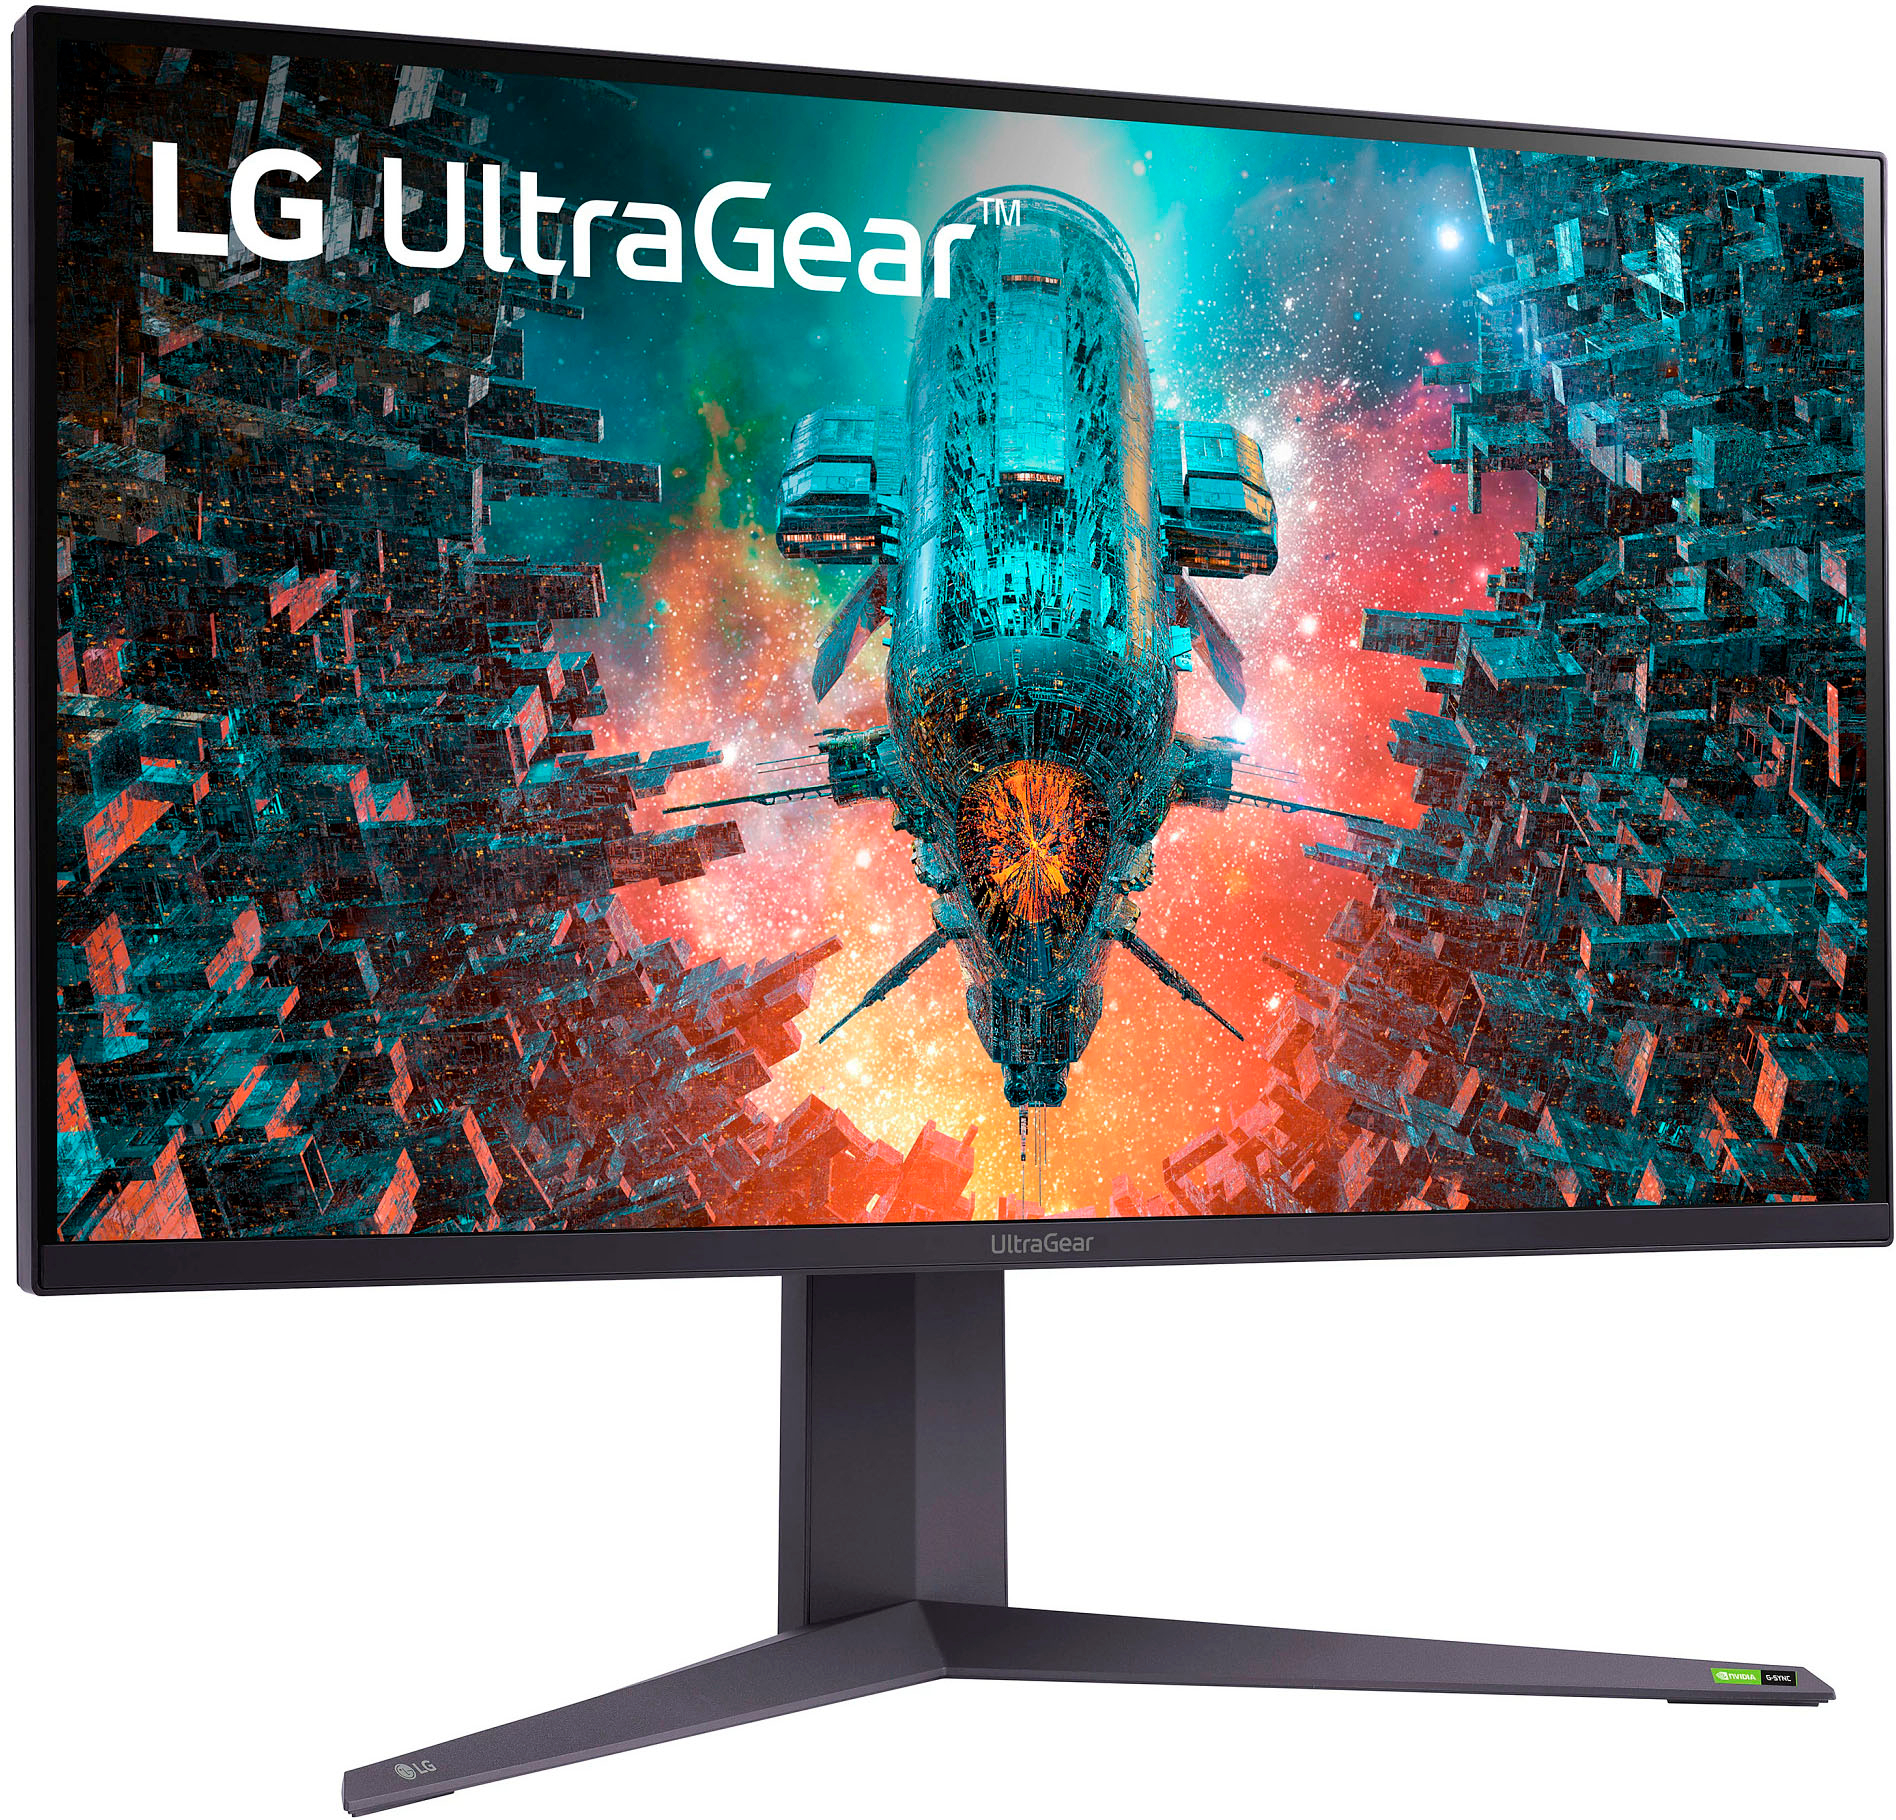 Left View: LG - UltraGear 32" IPS LED 4K UHD G-SYNC Compatible and AMD FreeSync Premium Pro Monitor with HDR (HDMI, DisplayPort)